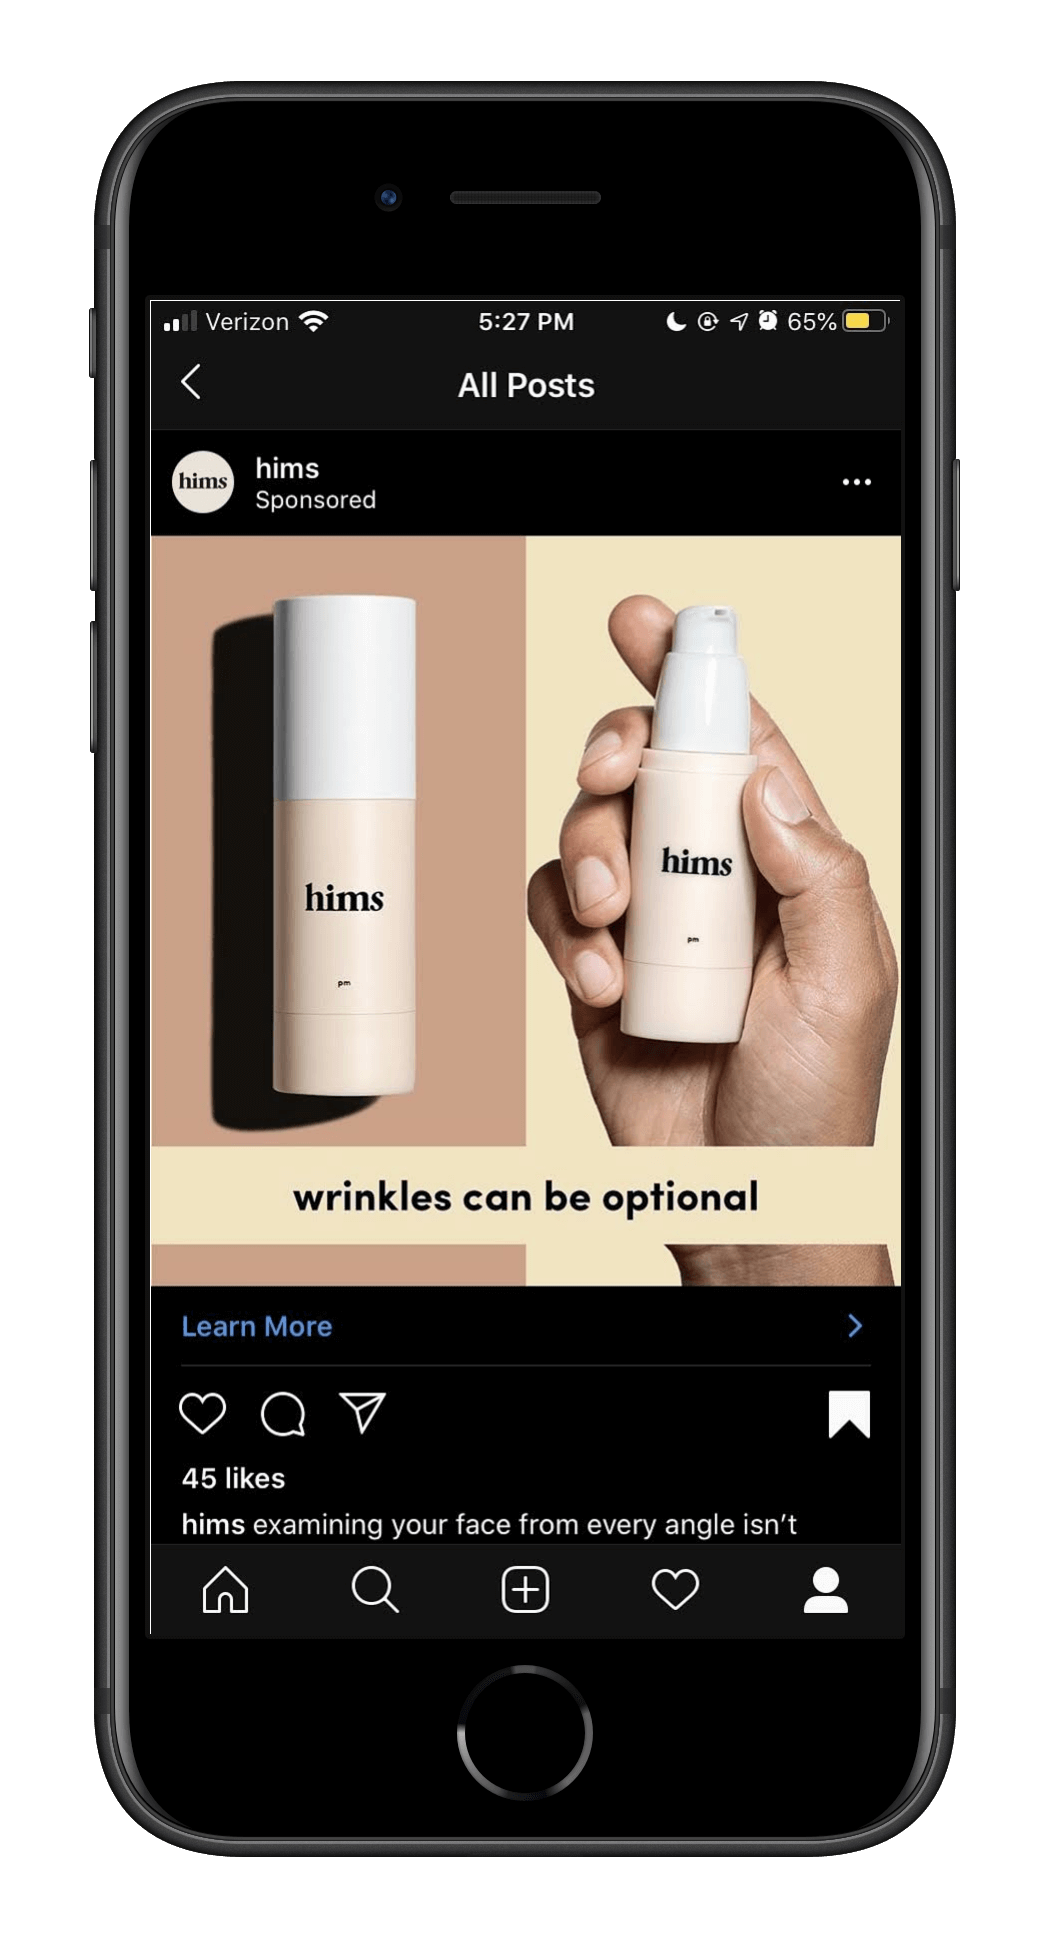 Hims instagram ad on an iPhone